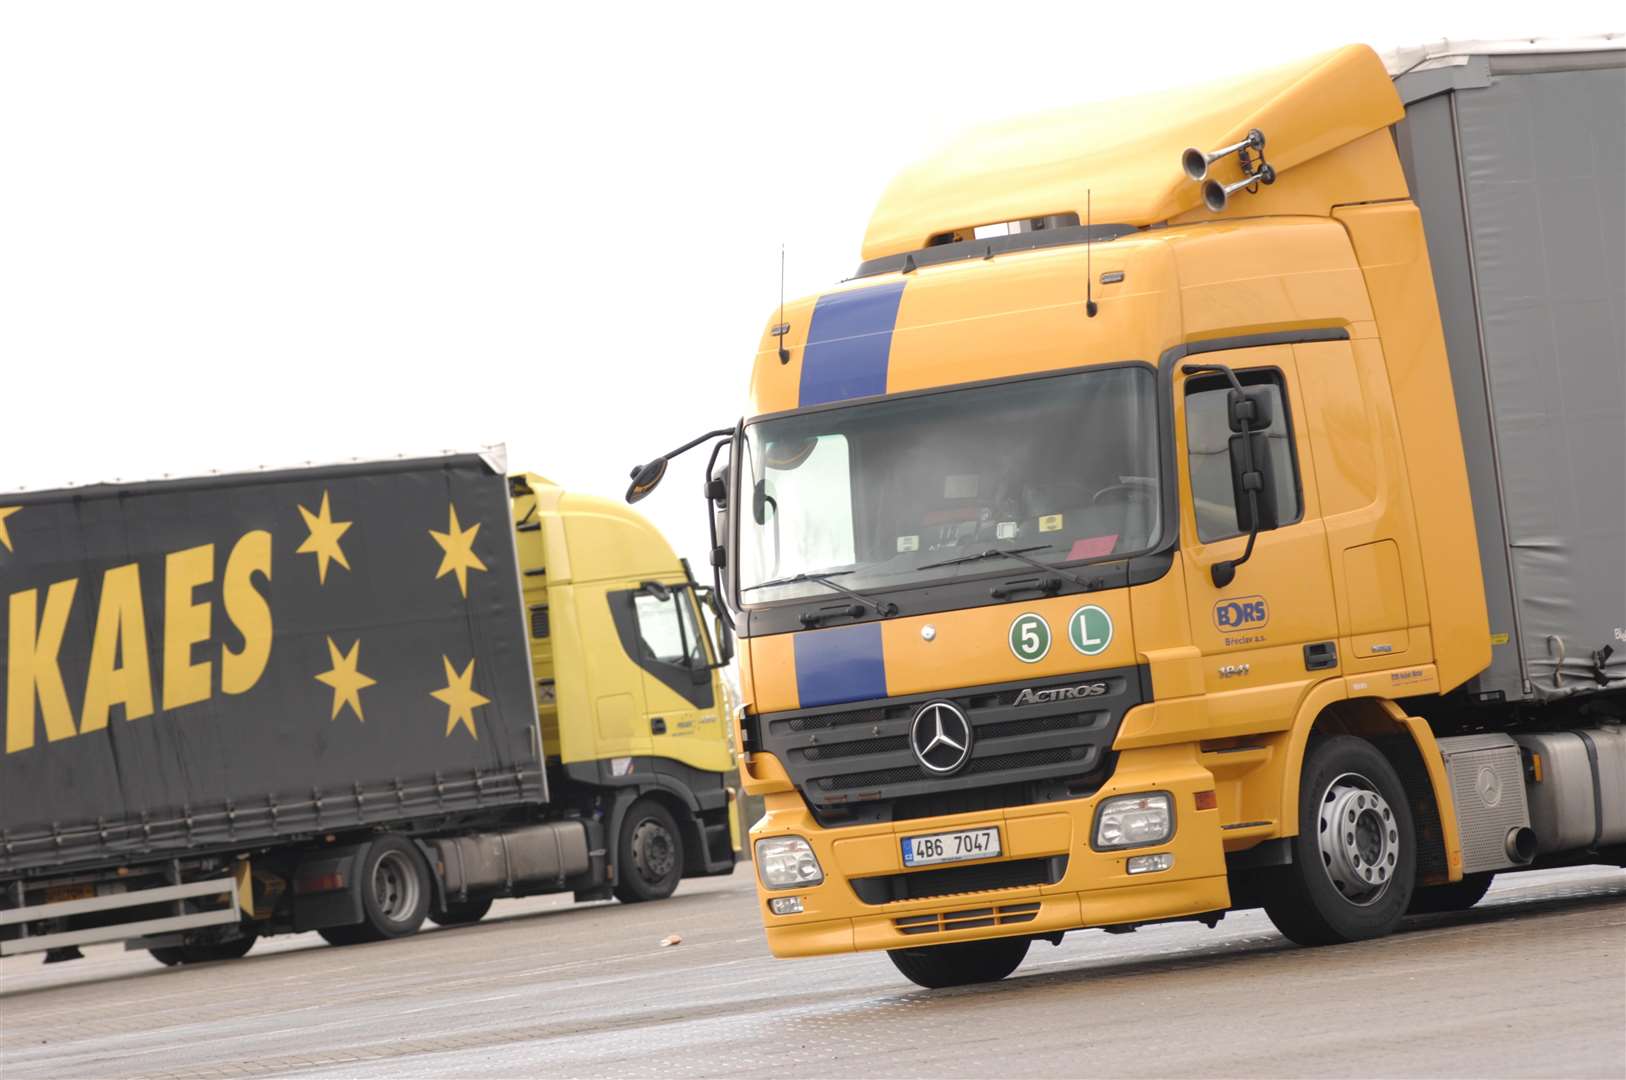 Could more truckstops help ease problems of lorry parking in the county?